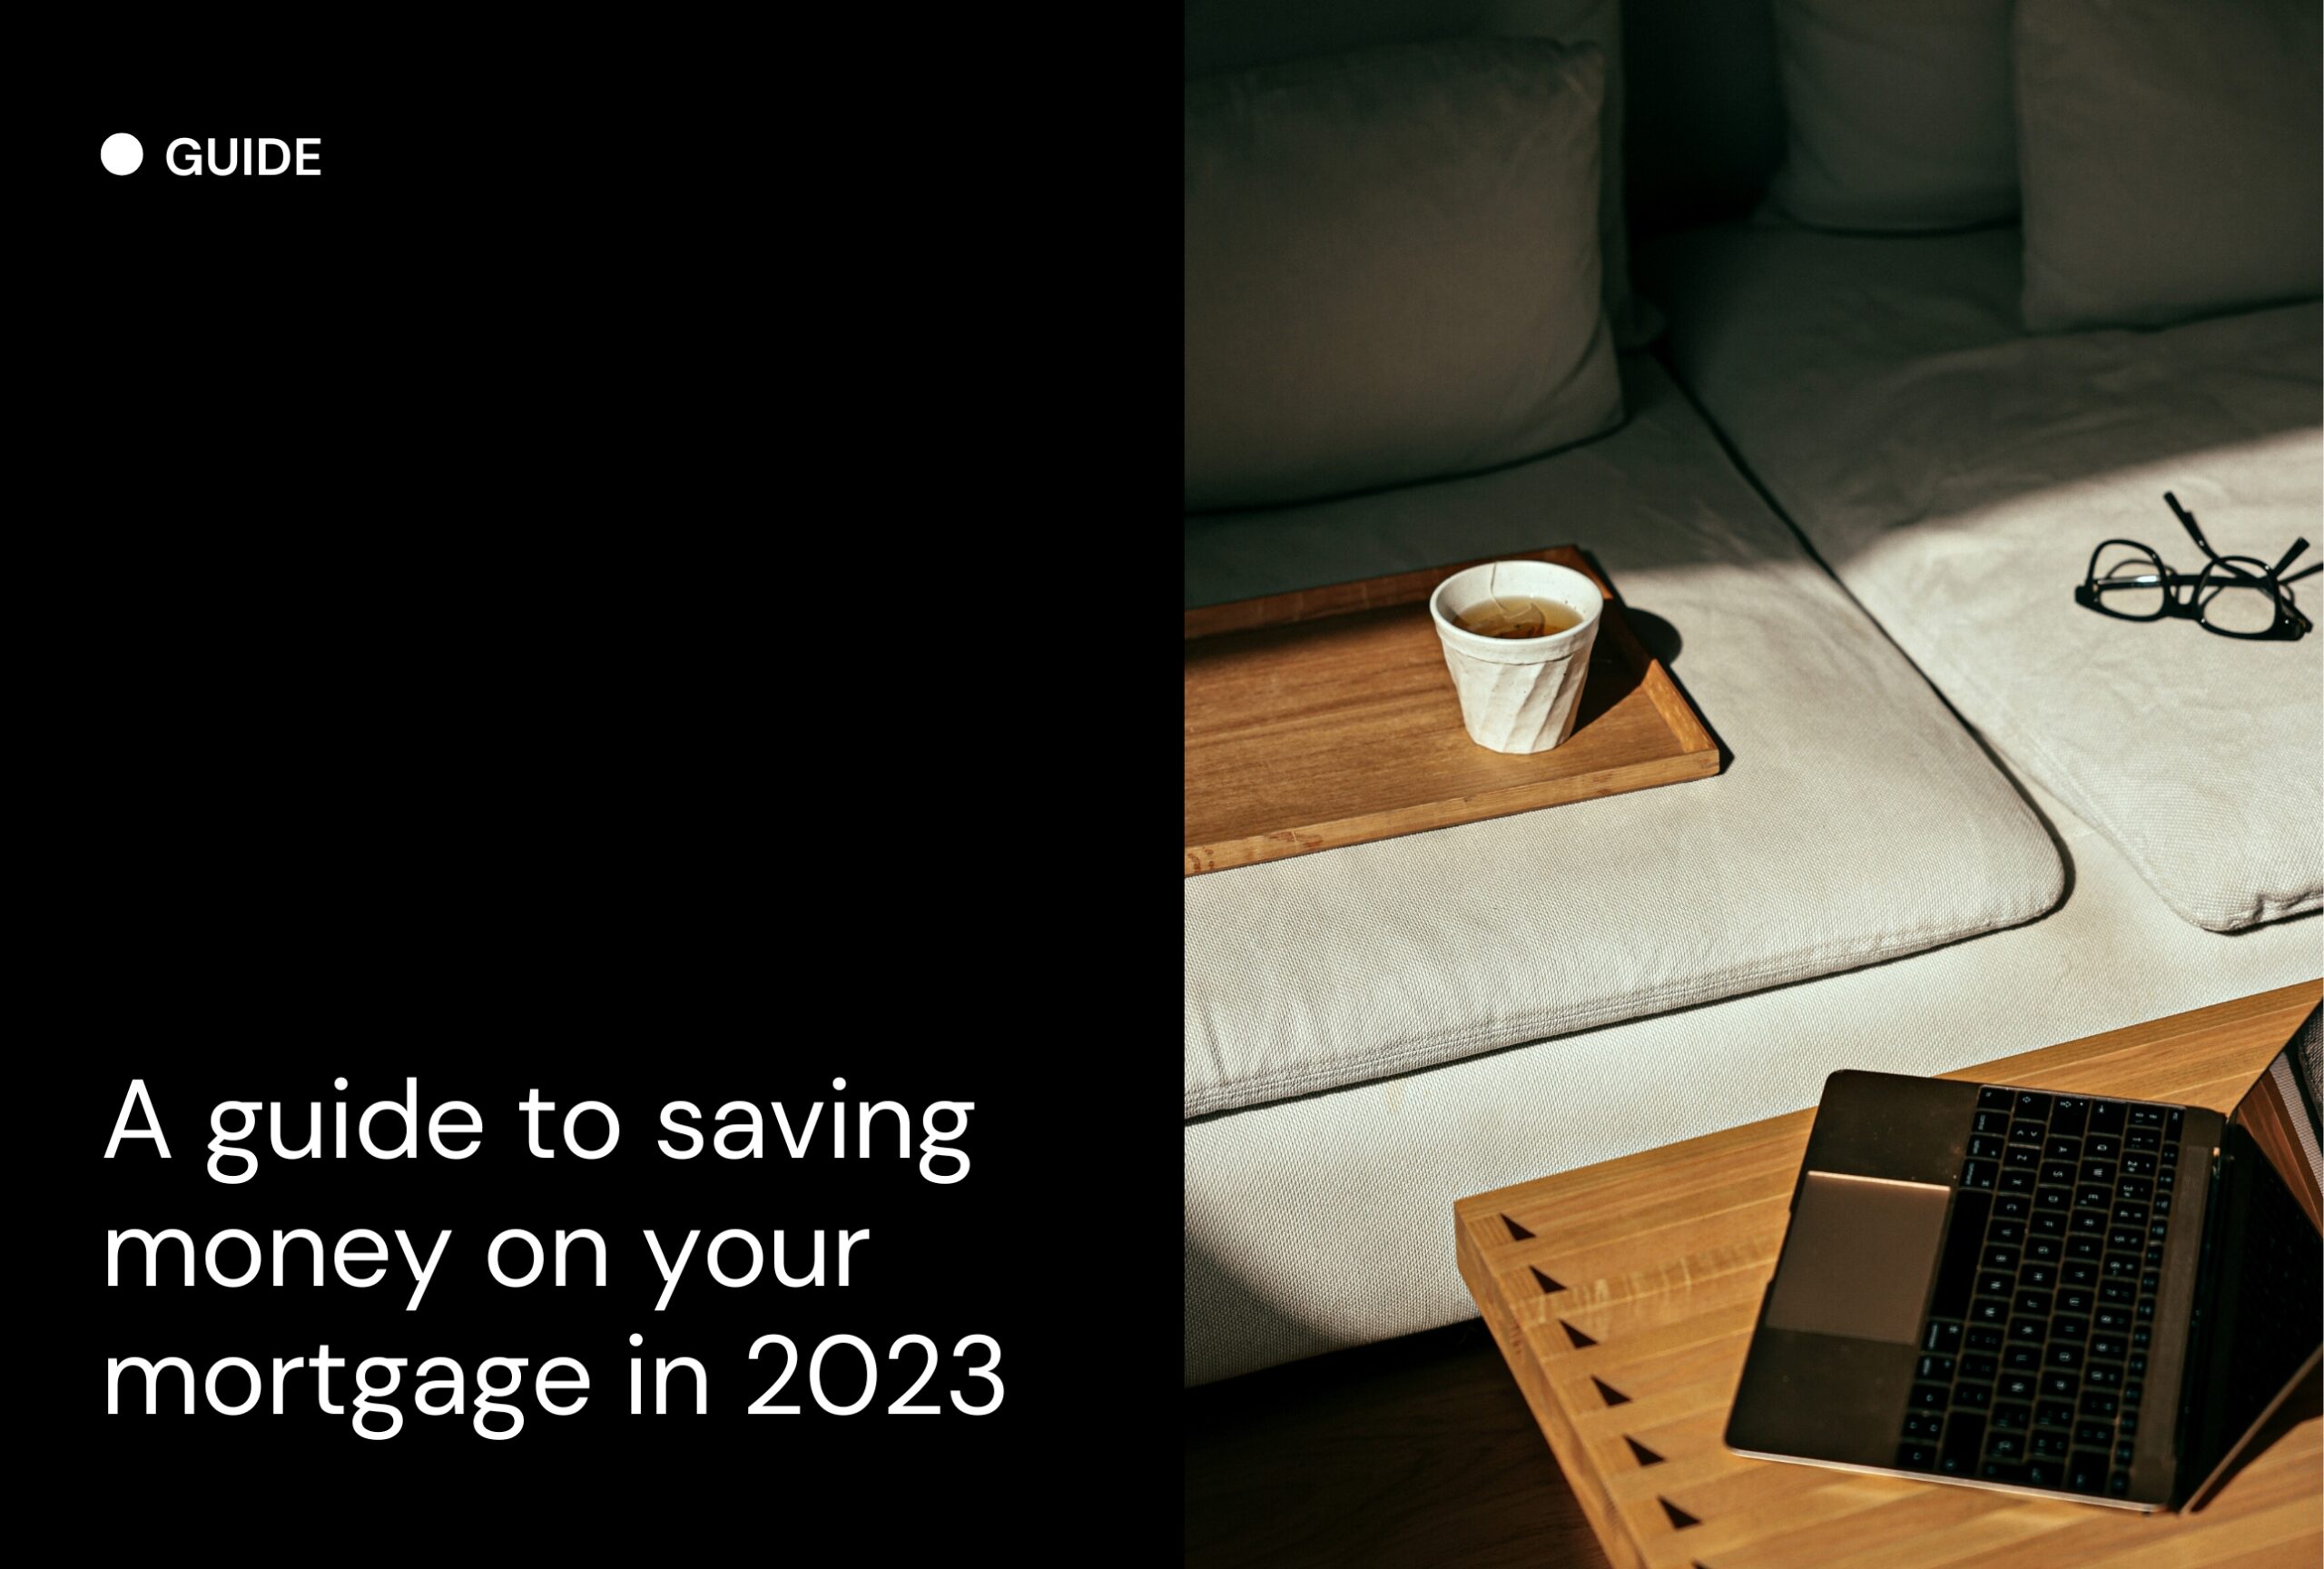 How to save money on your mortgage in 2023